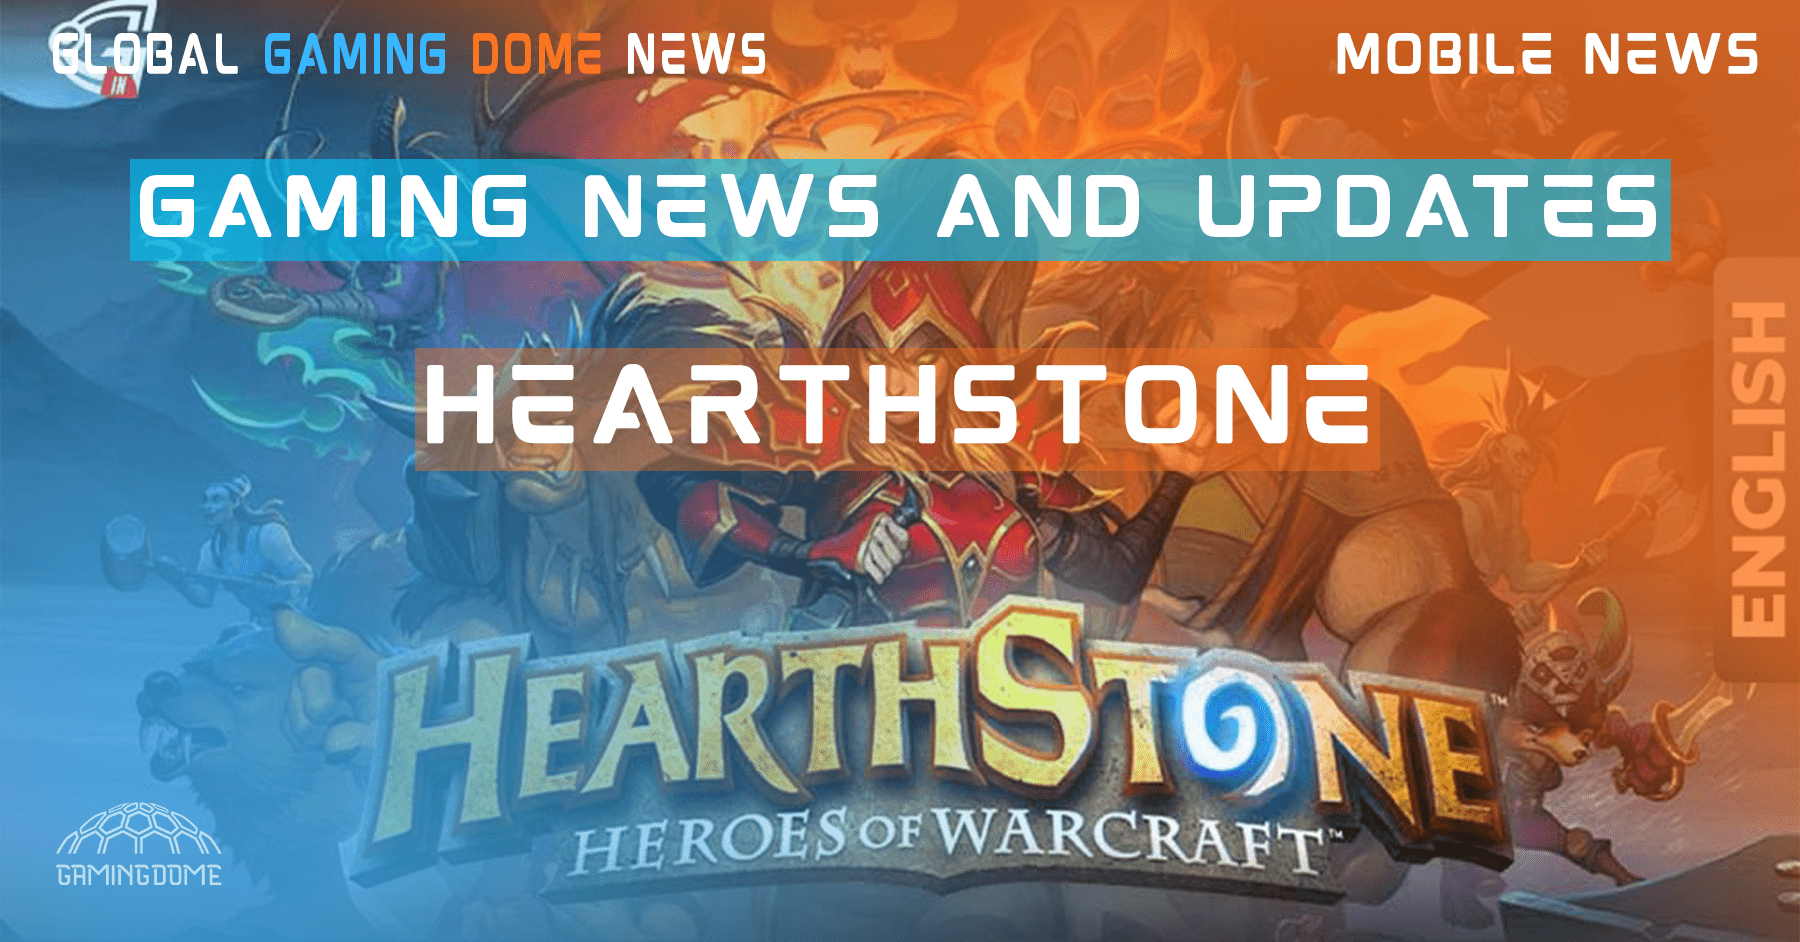 GAMING NEWS AND UPDATES, LATEST HEARTHSTONE NEWS AND KEYWORD